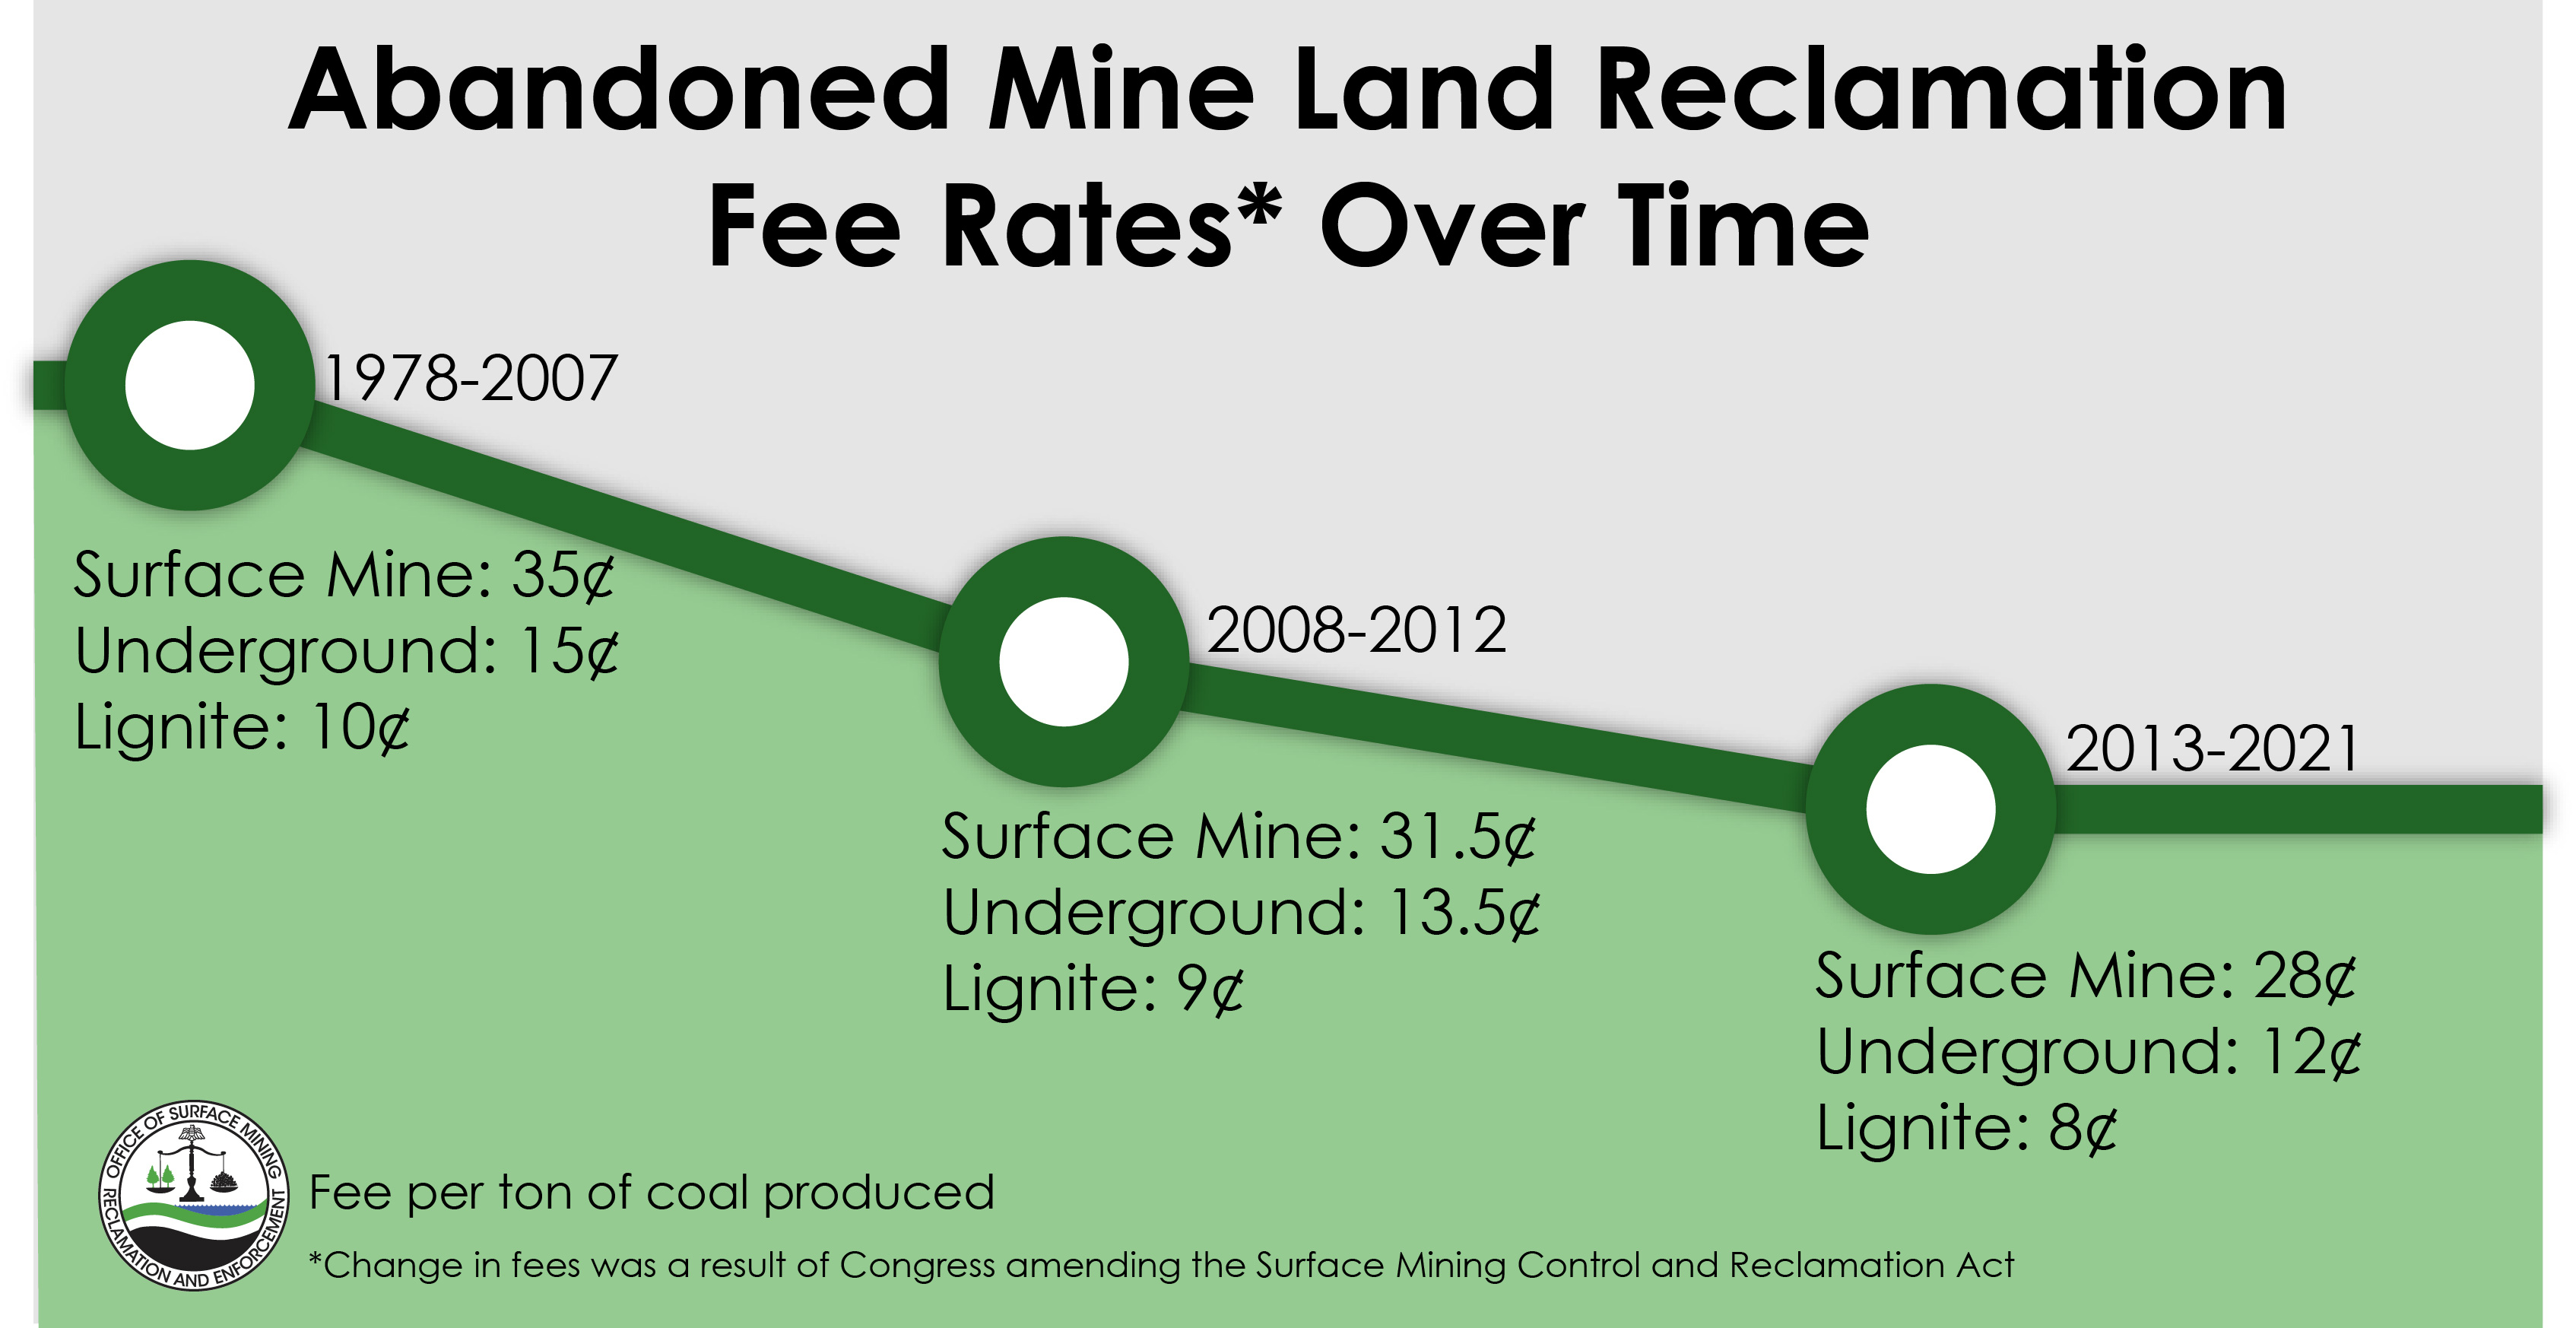 Changes in the coal reclamation fee over time